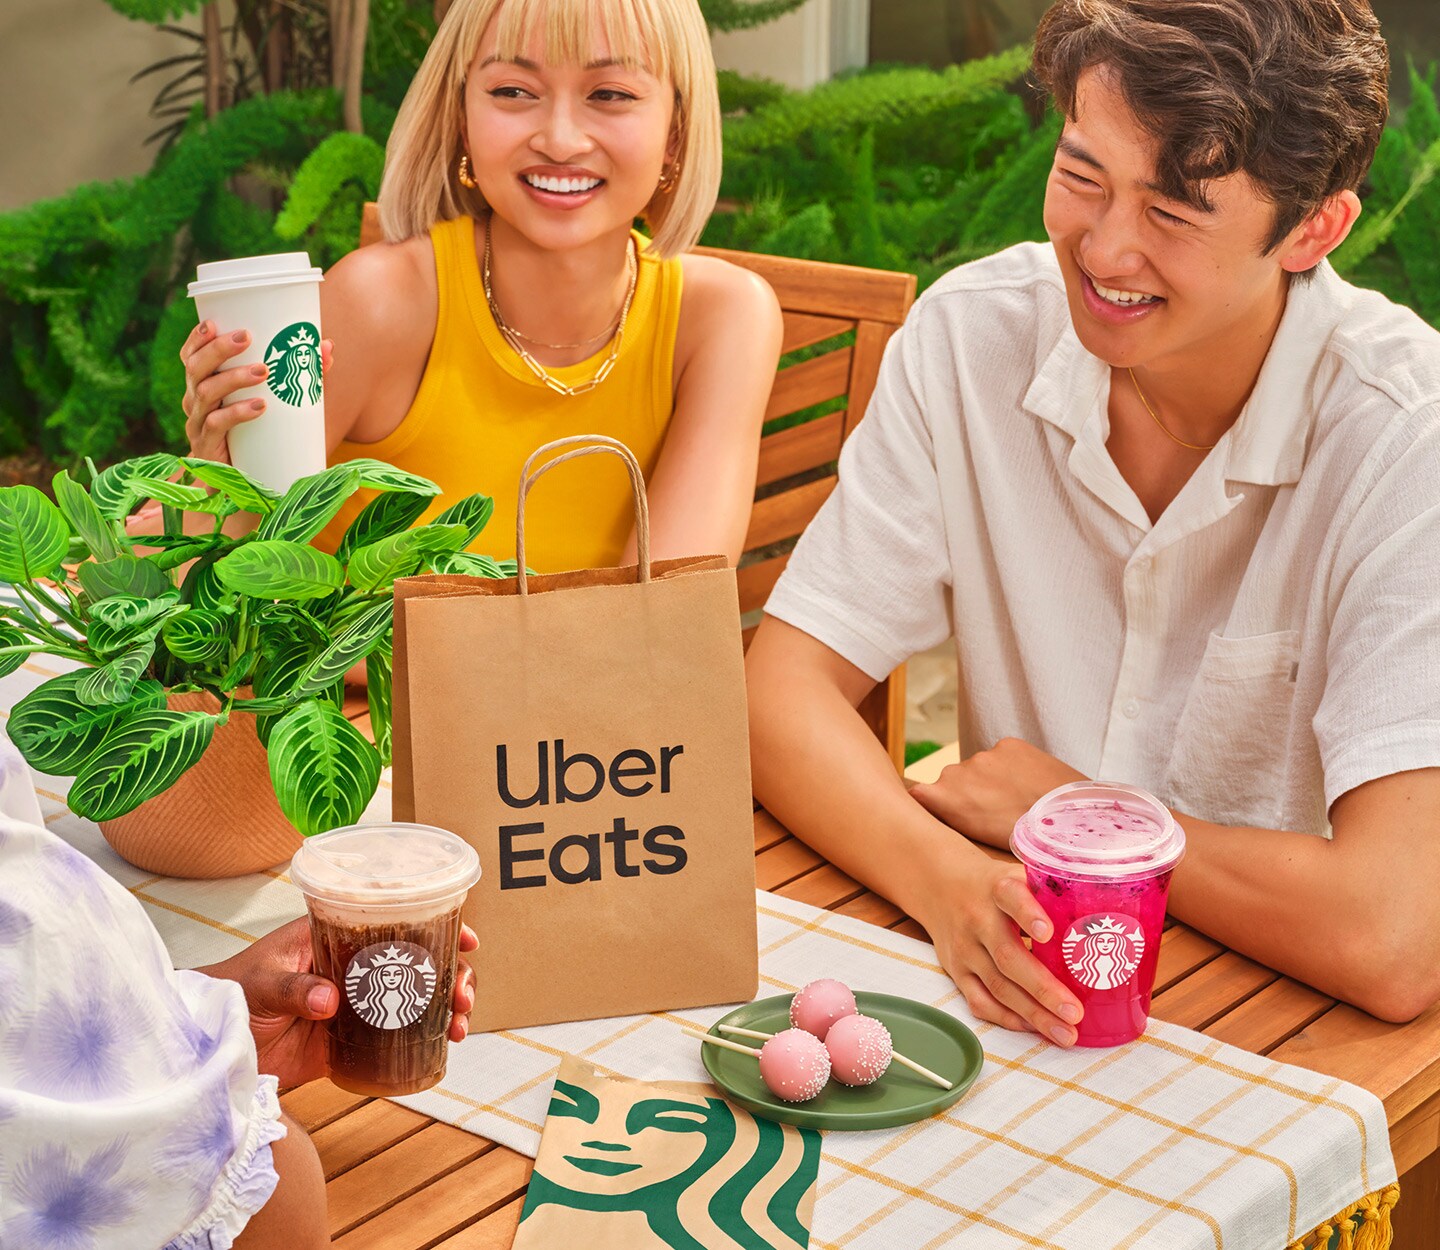 People gathered at a backyard table with Starbucks drinks, food and an Uber Eats delivery bag.